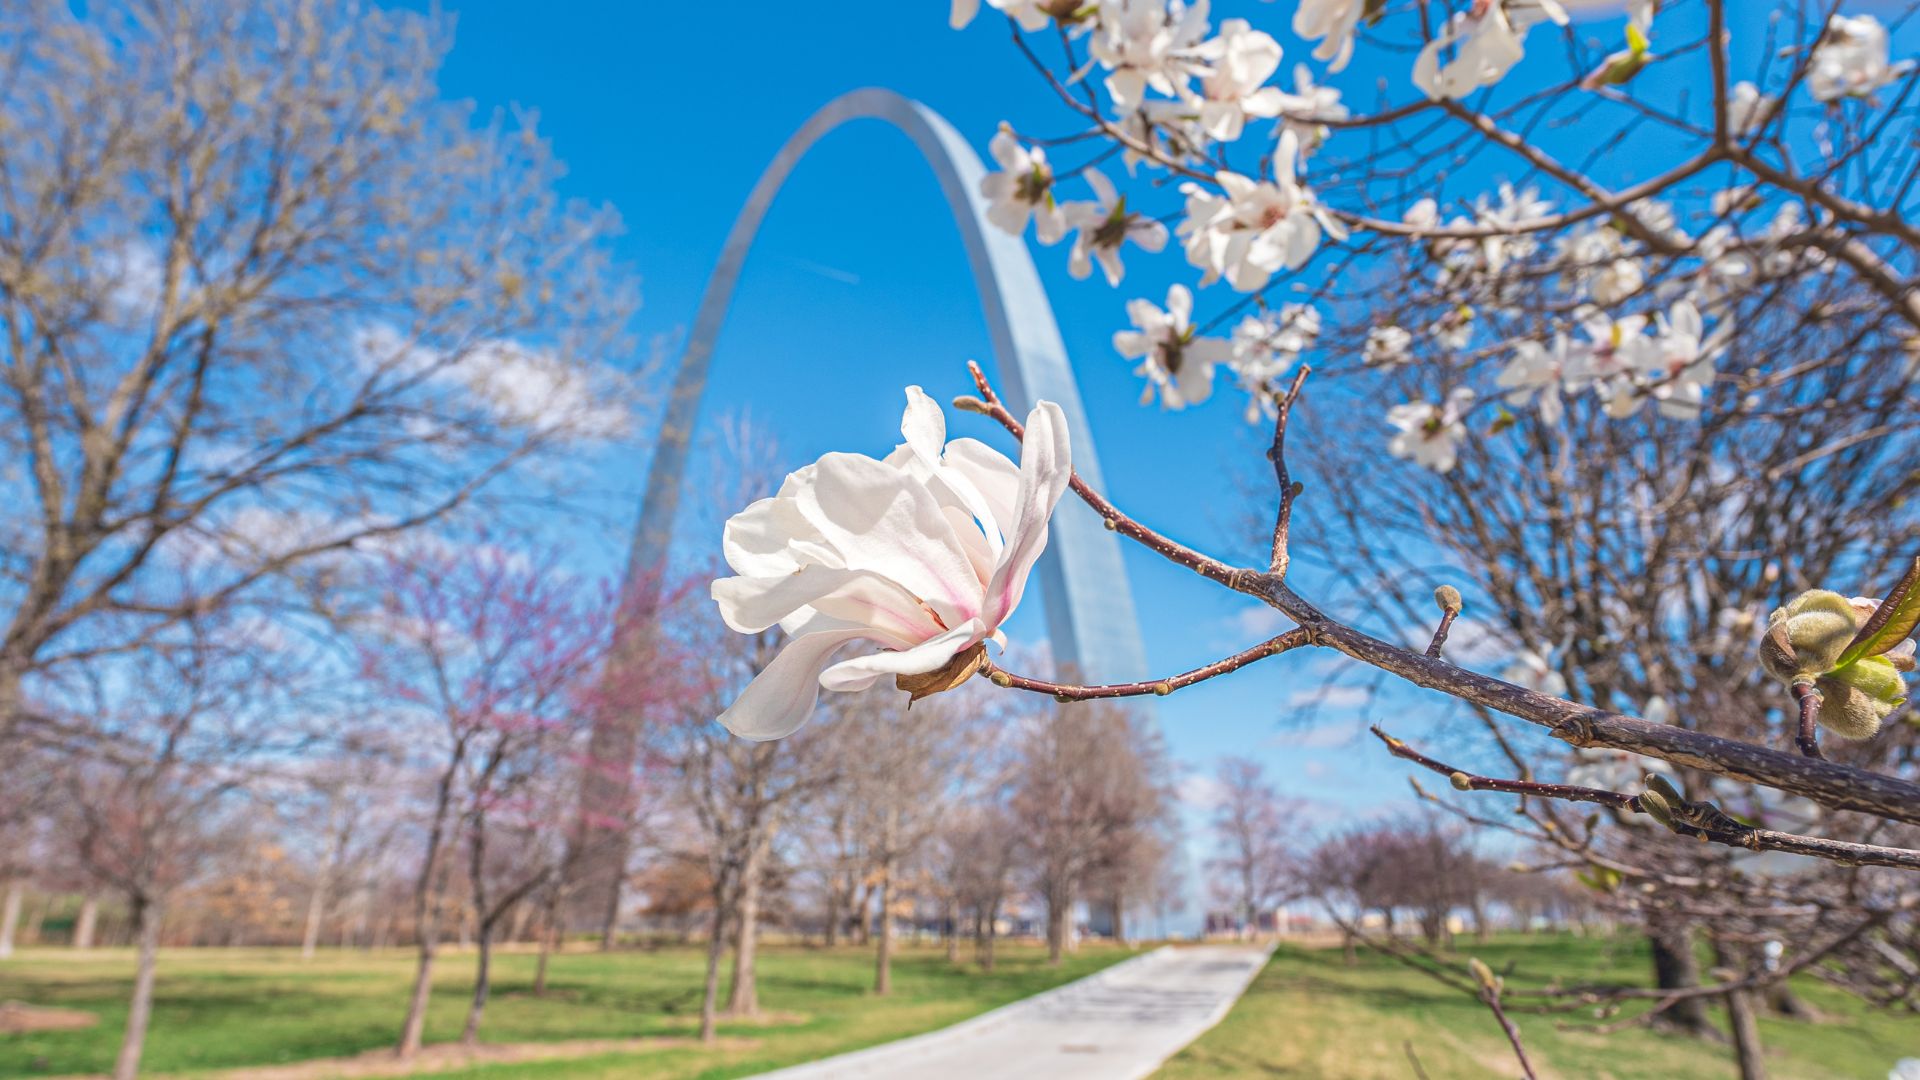 Flowering trees bloom in Gateway Arch National Park, which is one of the best places for outdoor recreation in St. Louis.